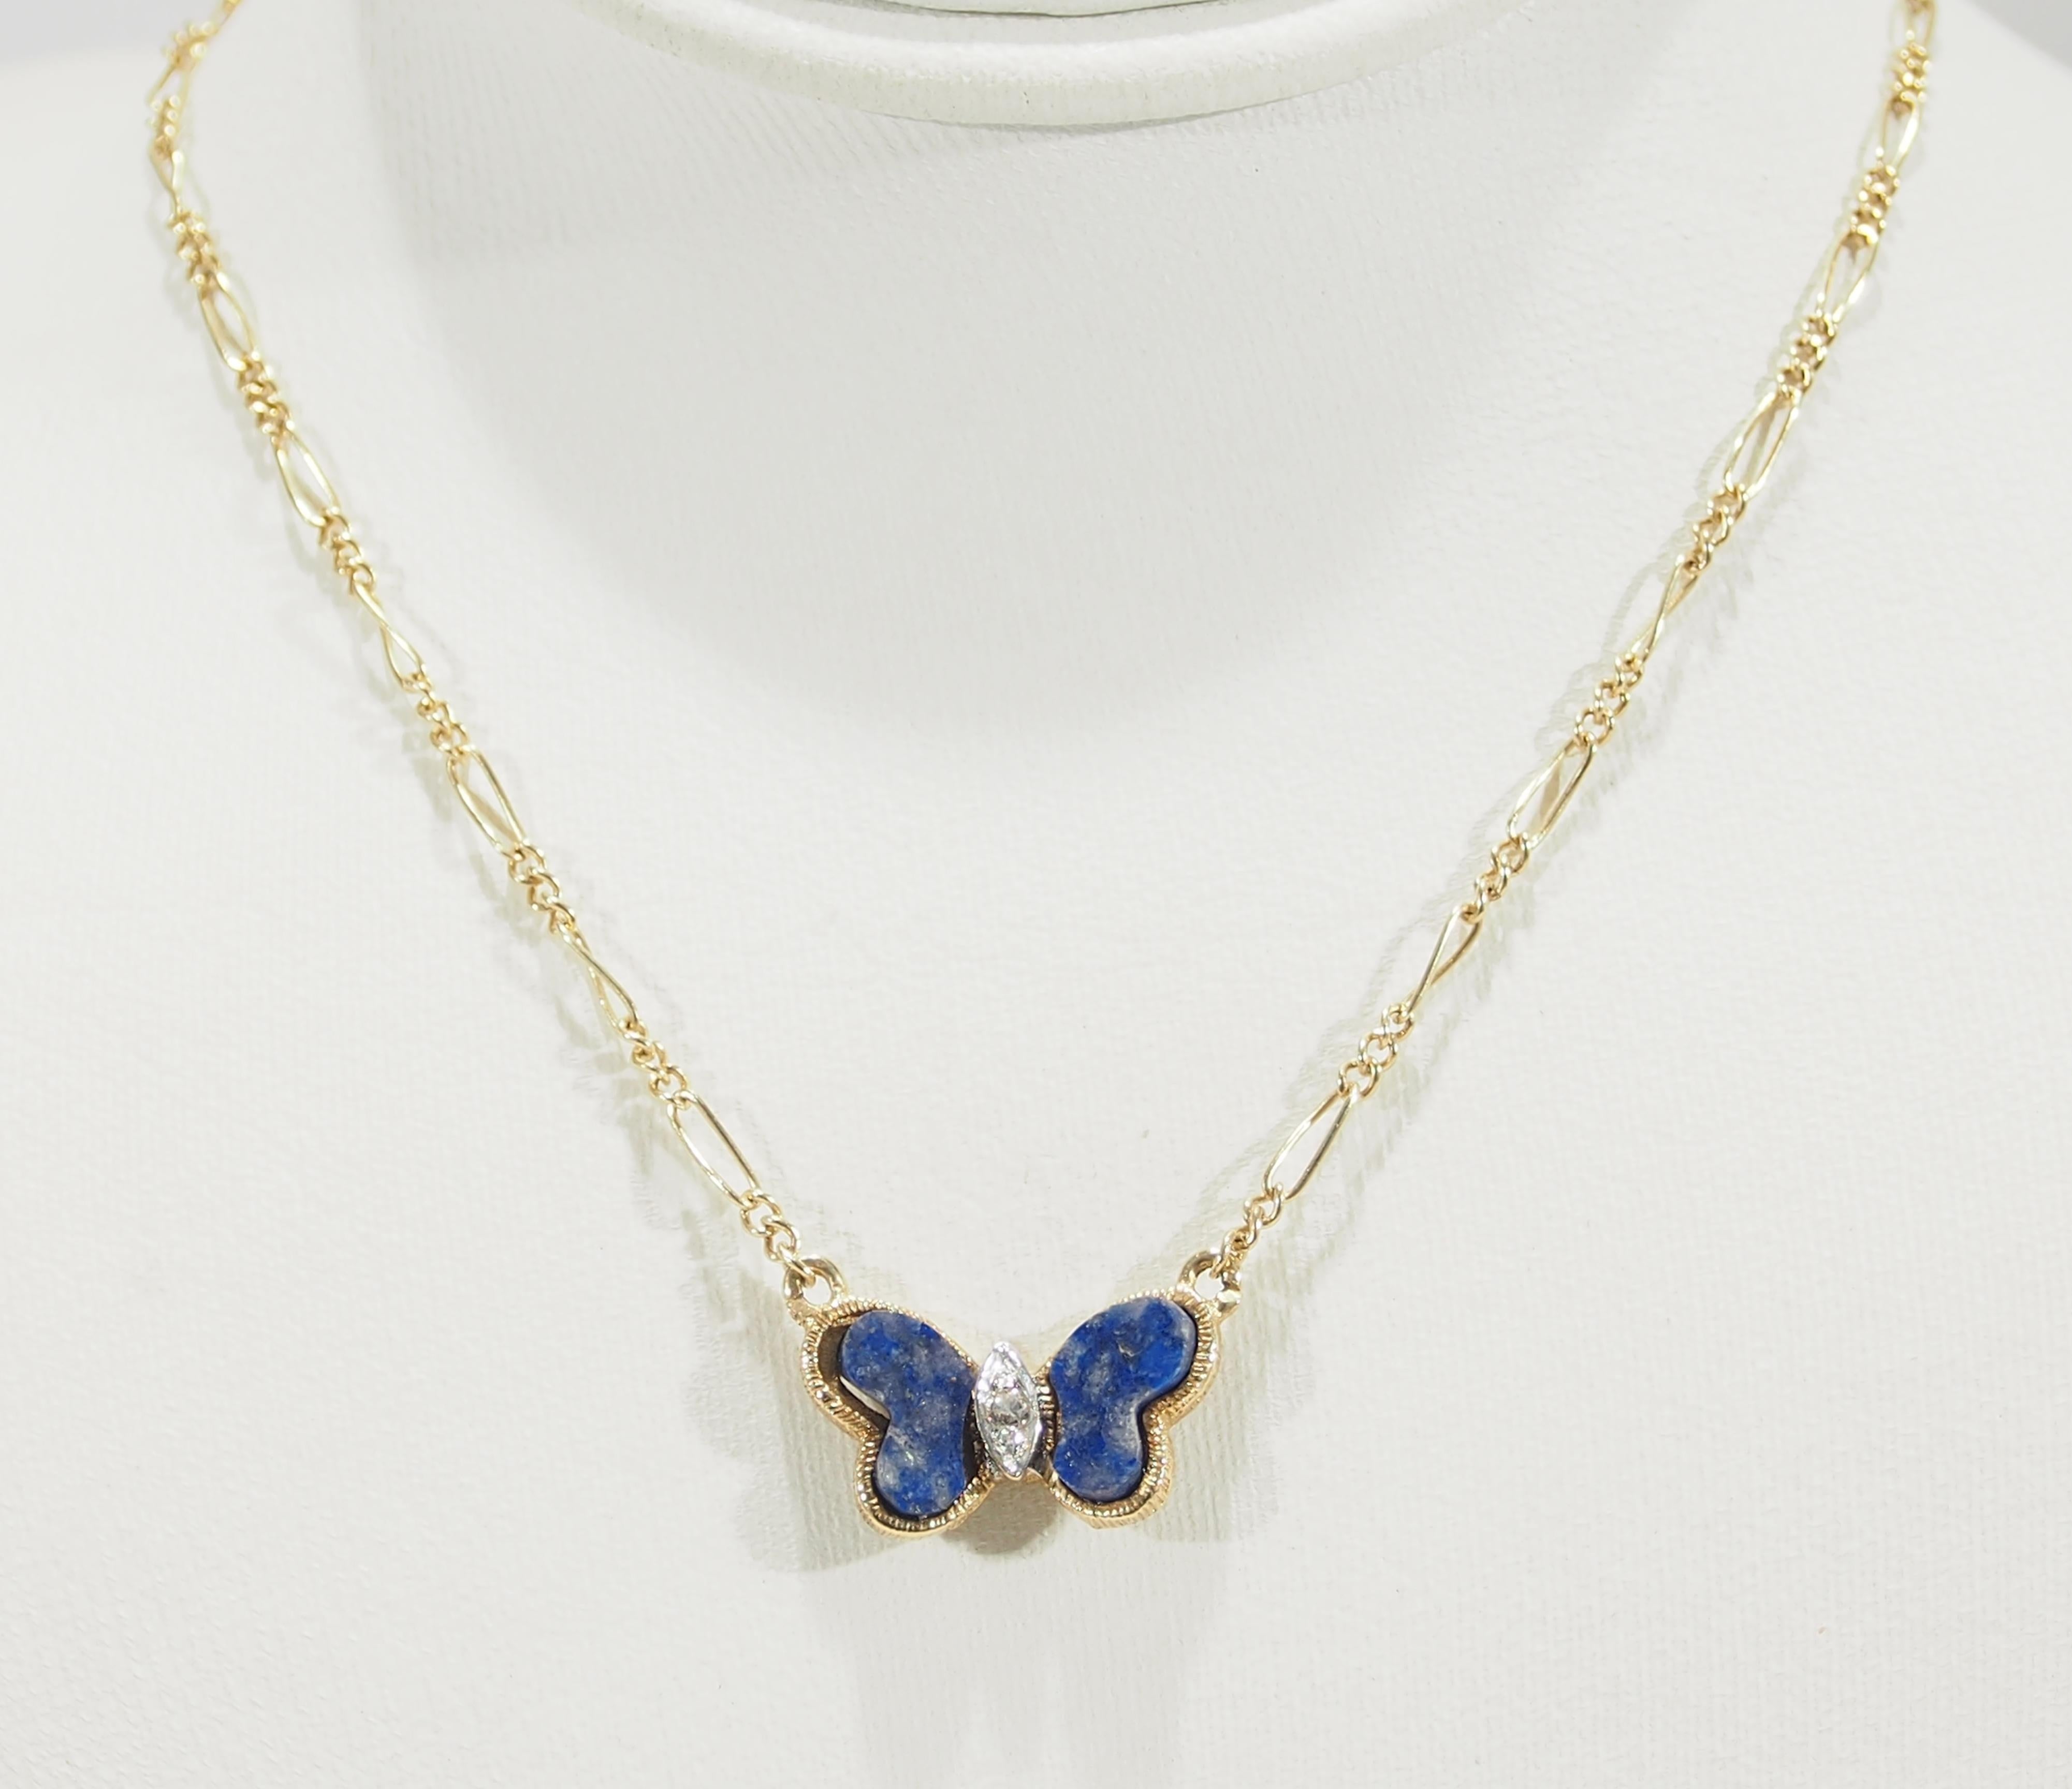 14K Yellow Gold Vintage Butterfly pendant from Hammerman Brothers sparkles with (3) Round Brilliant Cut Diamonds, G-I in Color, VS in Clarity, approximately 0.02 total weight and Lapis Lazuli wings. The pendant is attached to a lightweight Figaro